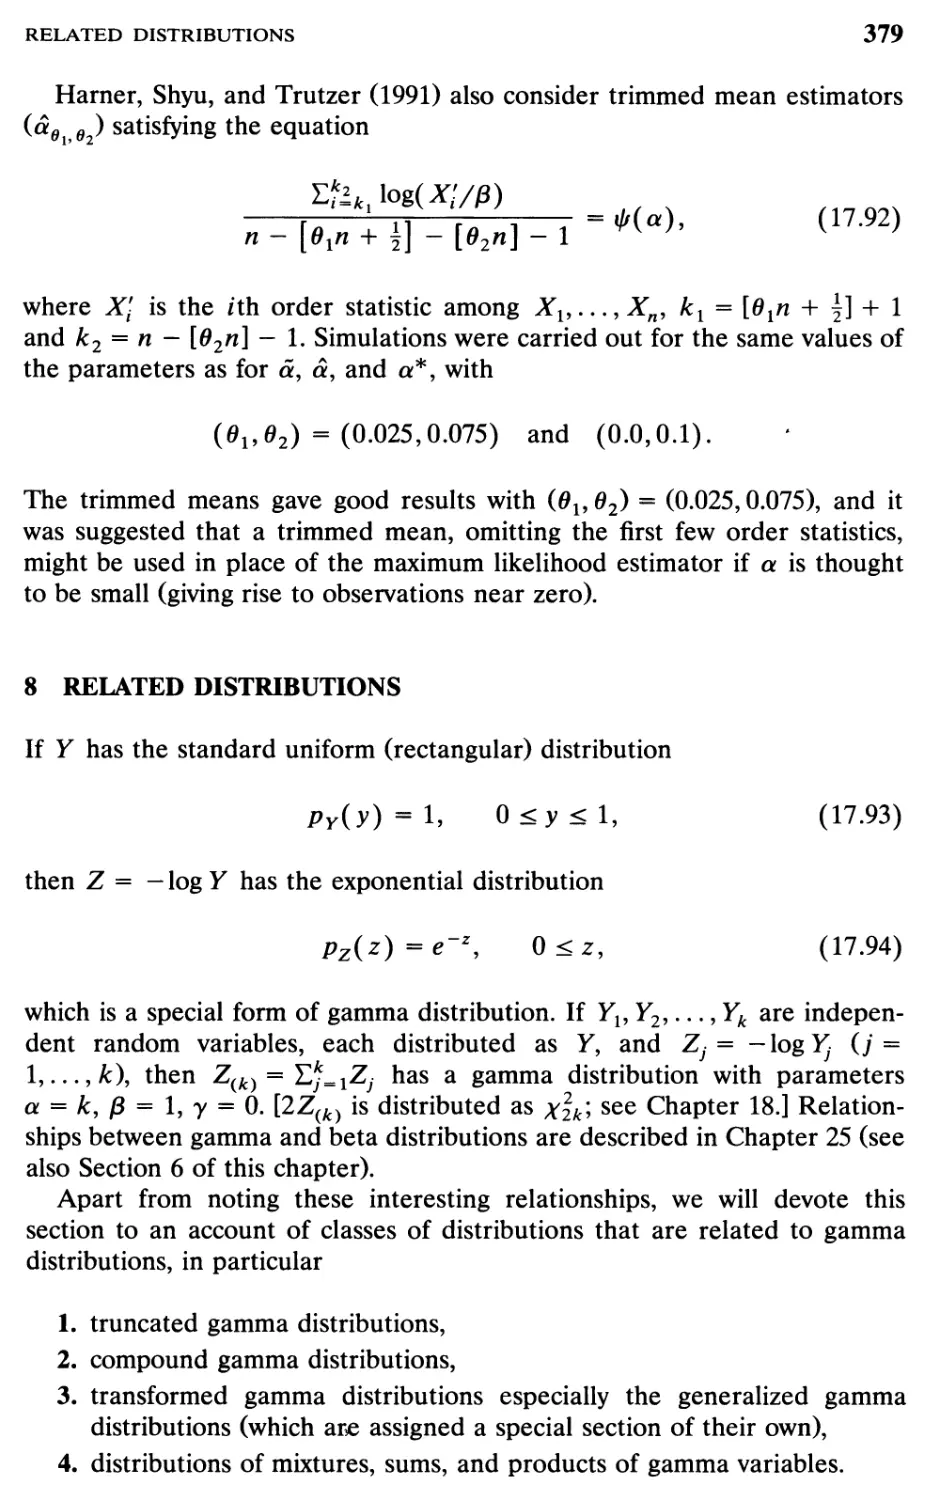 8 Related Distributions, 379